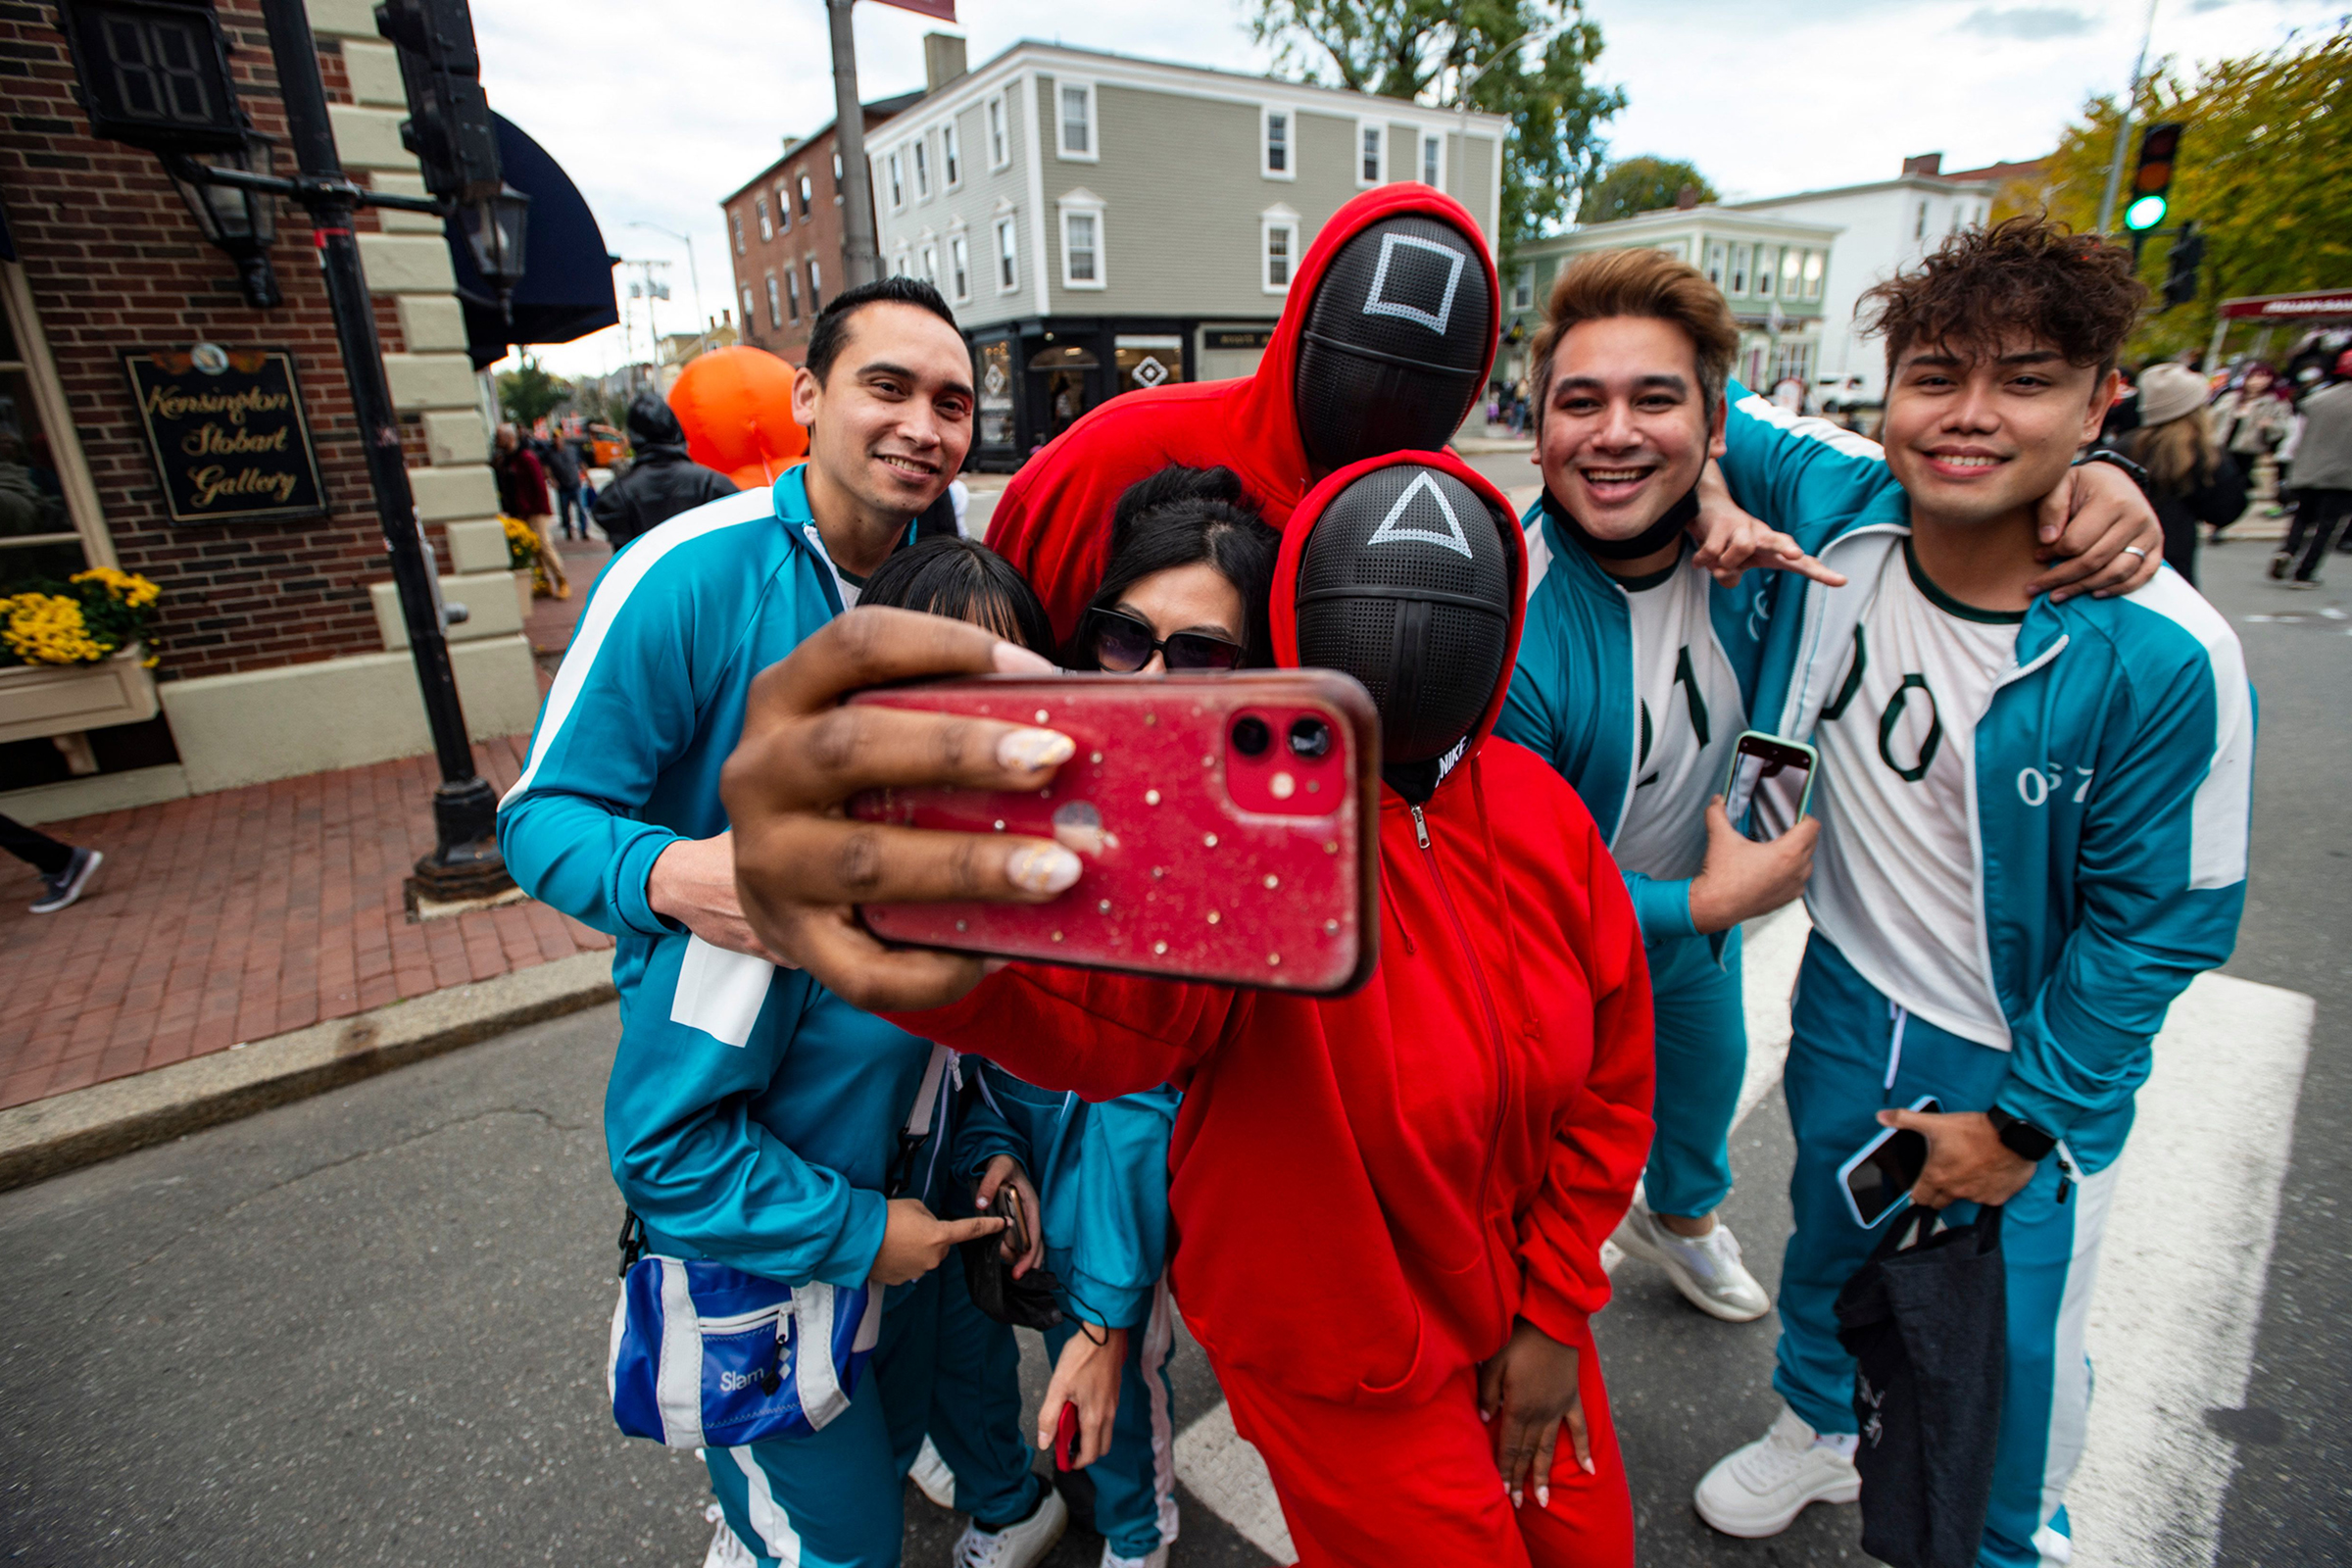 A group dressed as characters from the Netflix show "Squid Game" pose for a 'selfie' on Halloween in Salem, Massachusetts on October 31, 2021. (Joseph Prezioso—AFP/Getty Images)